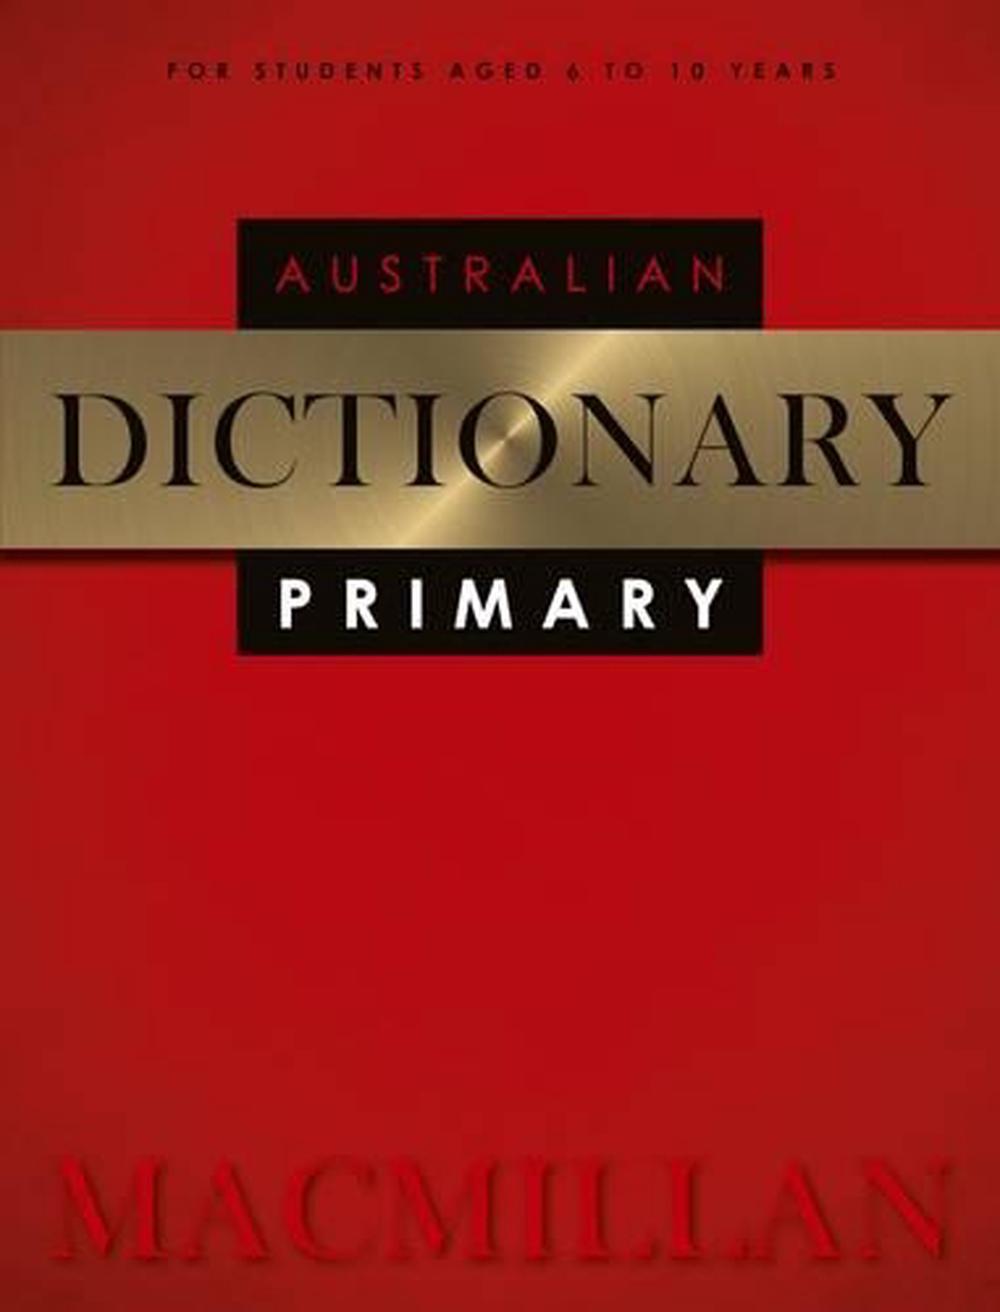 Nile　Paperback,　The　Primary　Dictionary　by　2nd　online　Australian　Macmillan,　at　9781742619941　Buy　Macmillan　Edition